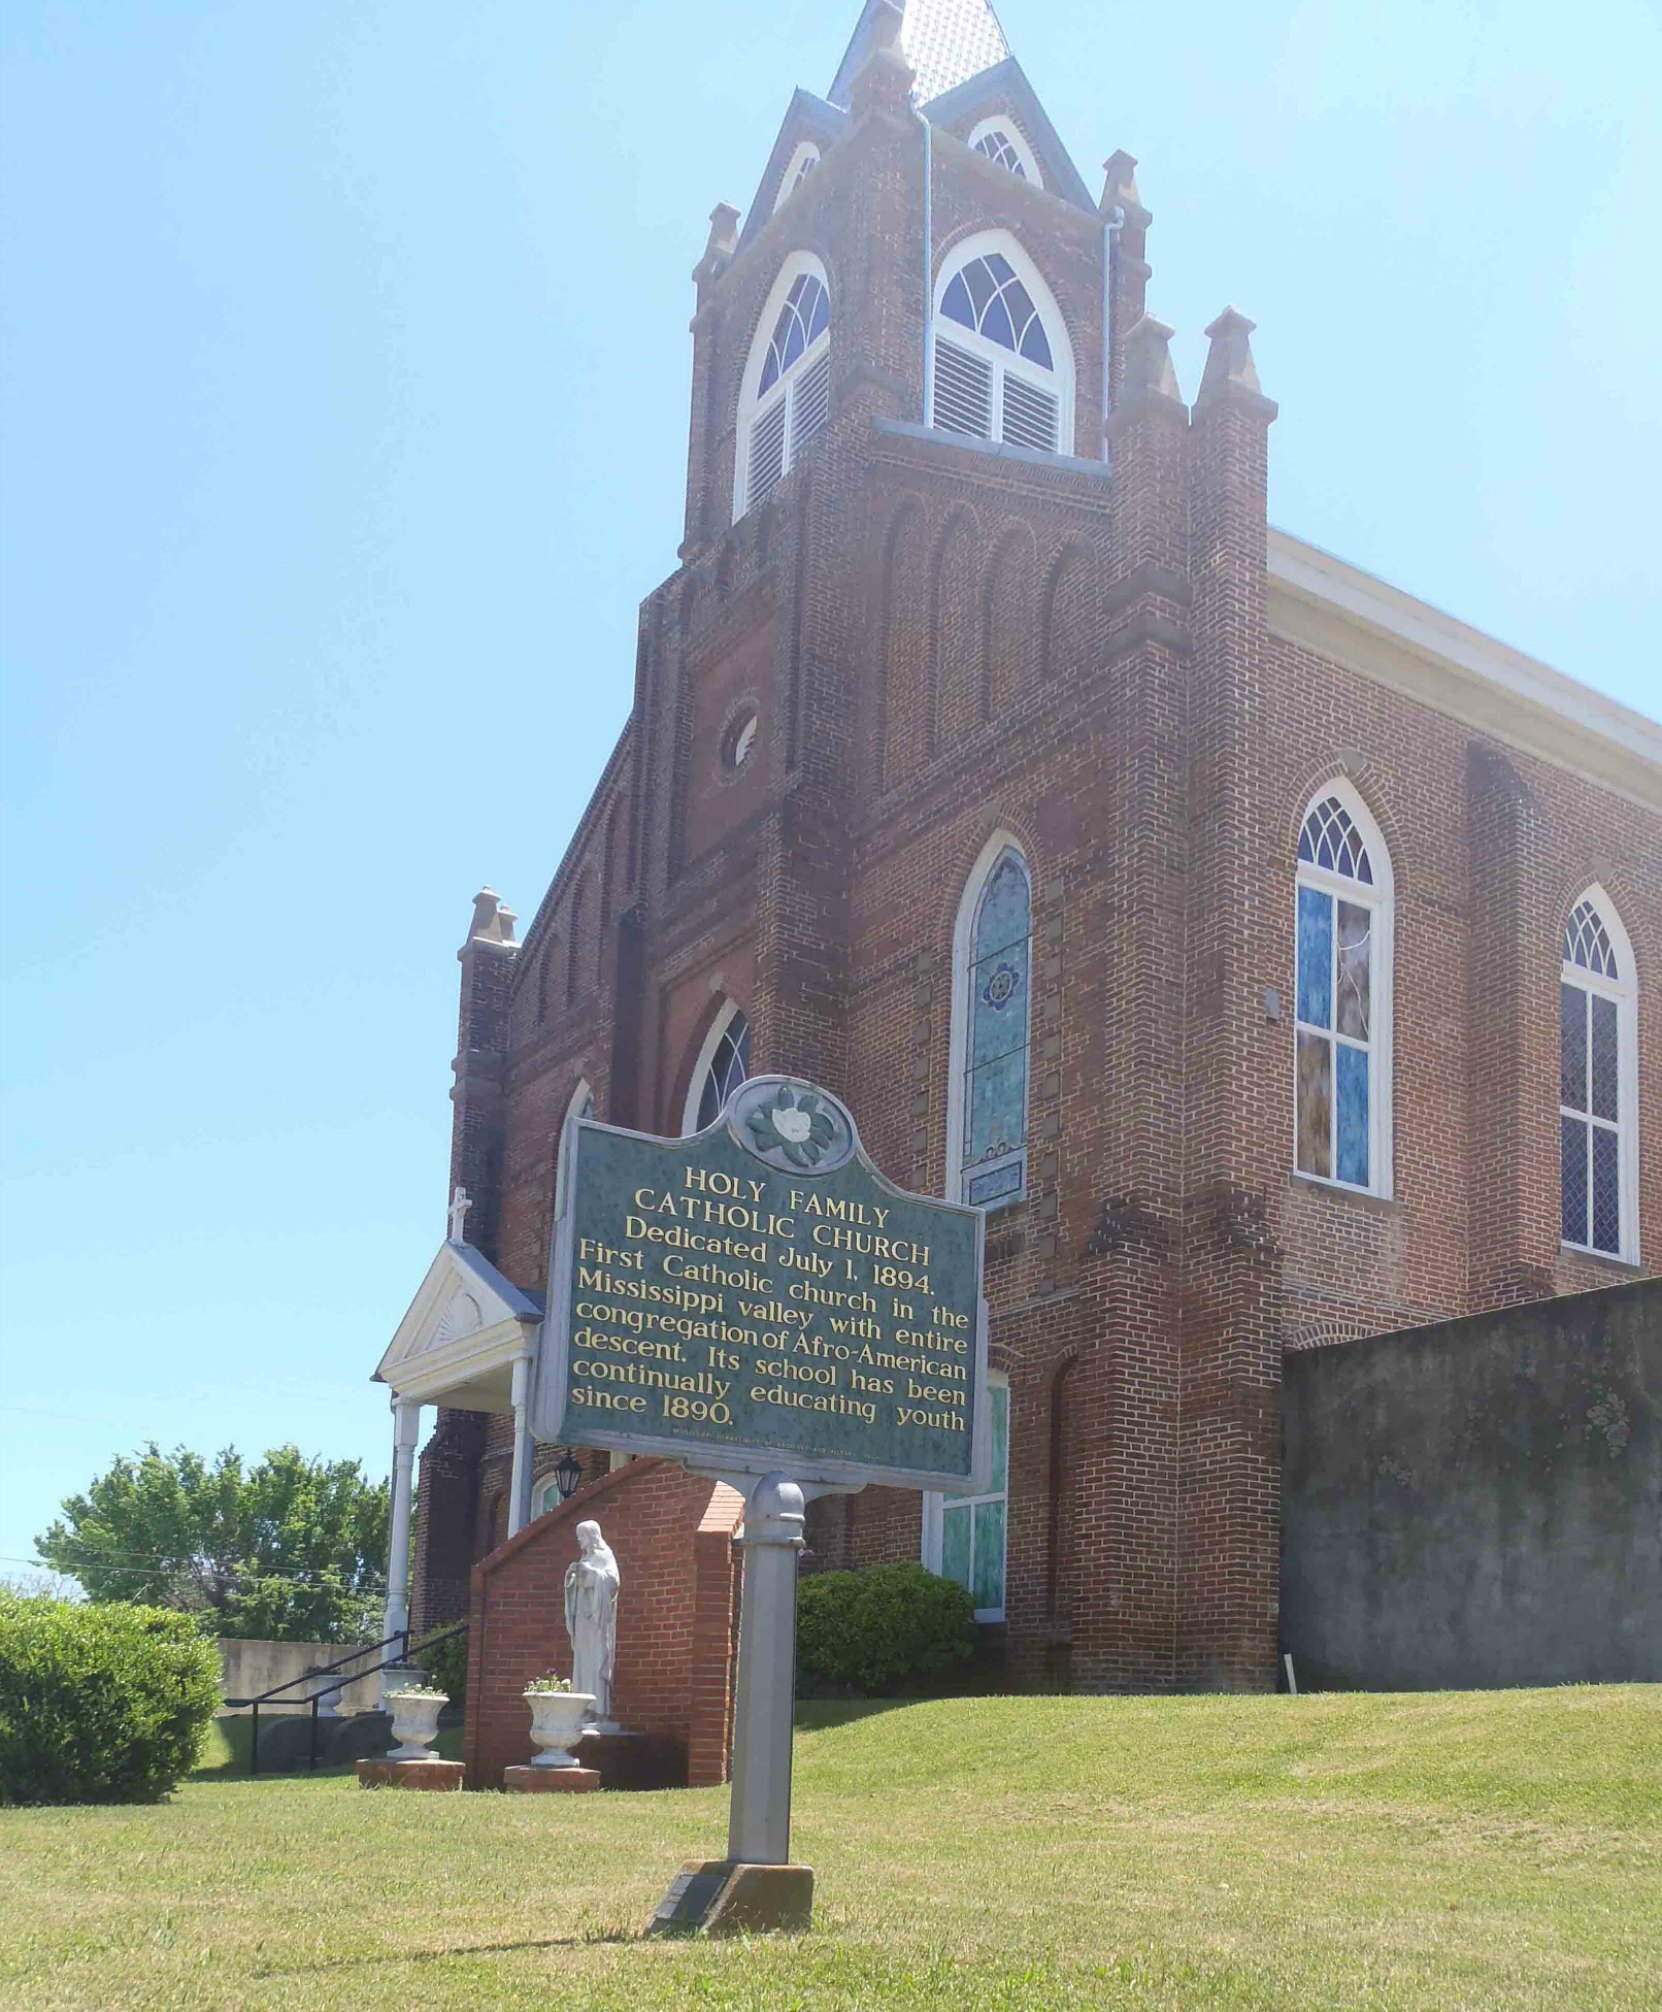 The Mississippi Department of Archives & History marker outside Holy Family Catholic Church, Natchez, Mississippi